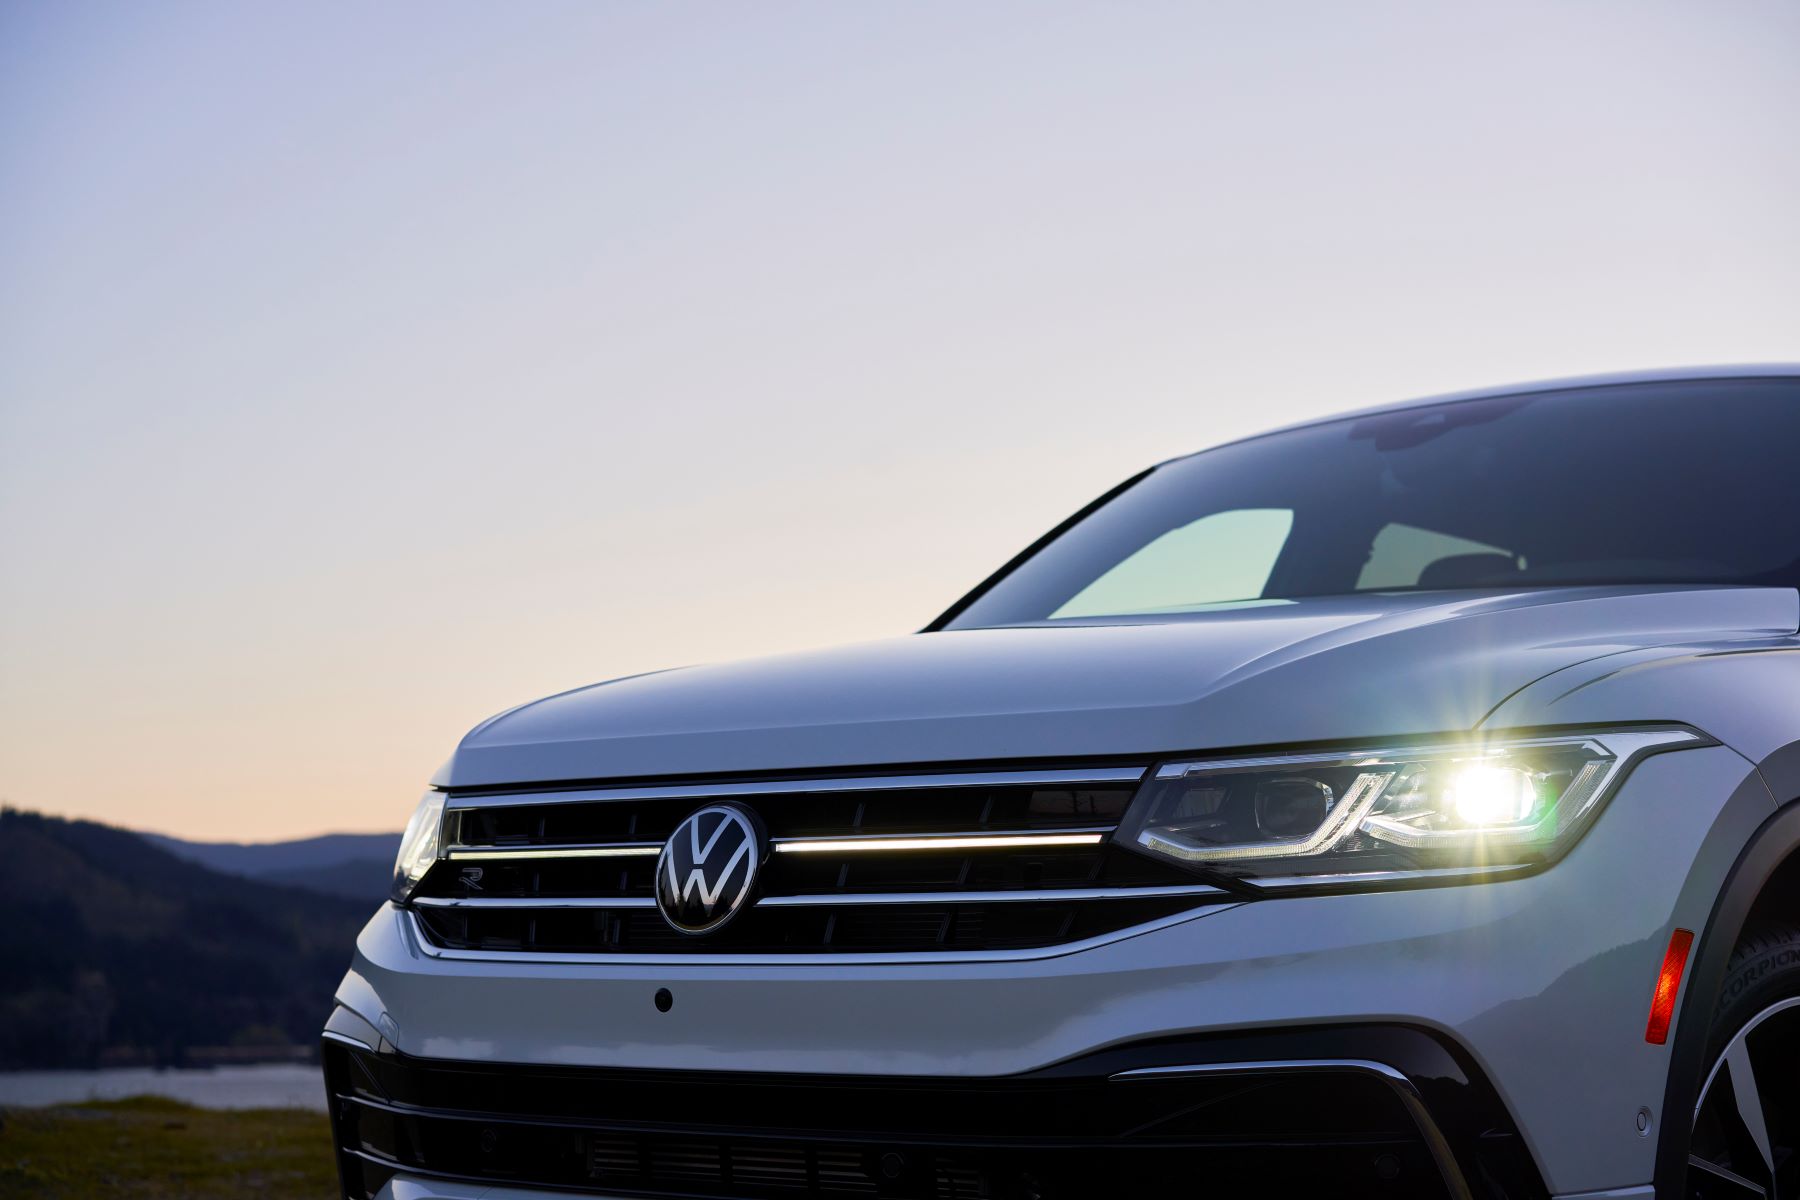 A closeup exterior shot of the grille and headlights of a white 2022 Volkswagen Tiguan SEL R-Line compact SUV model